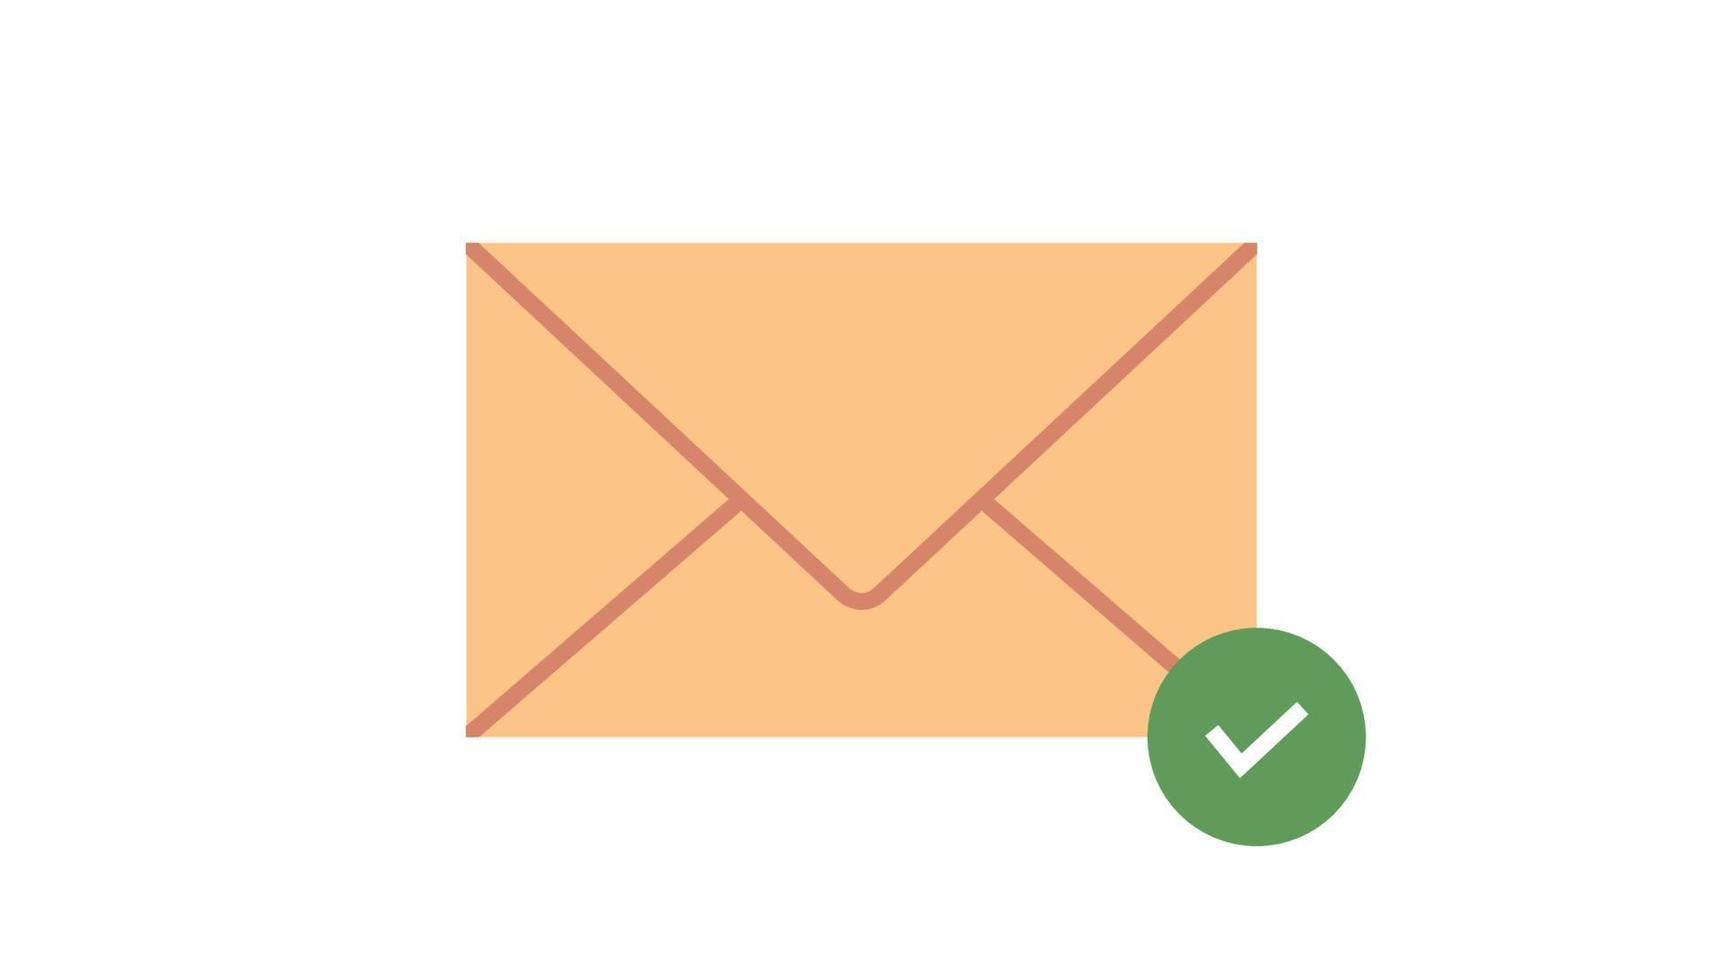 Confirmation sign on email symbol and email reading check simple concept flat vector illustration.